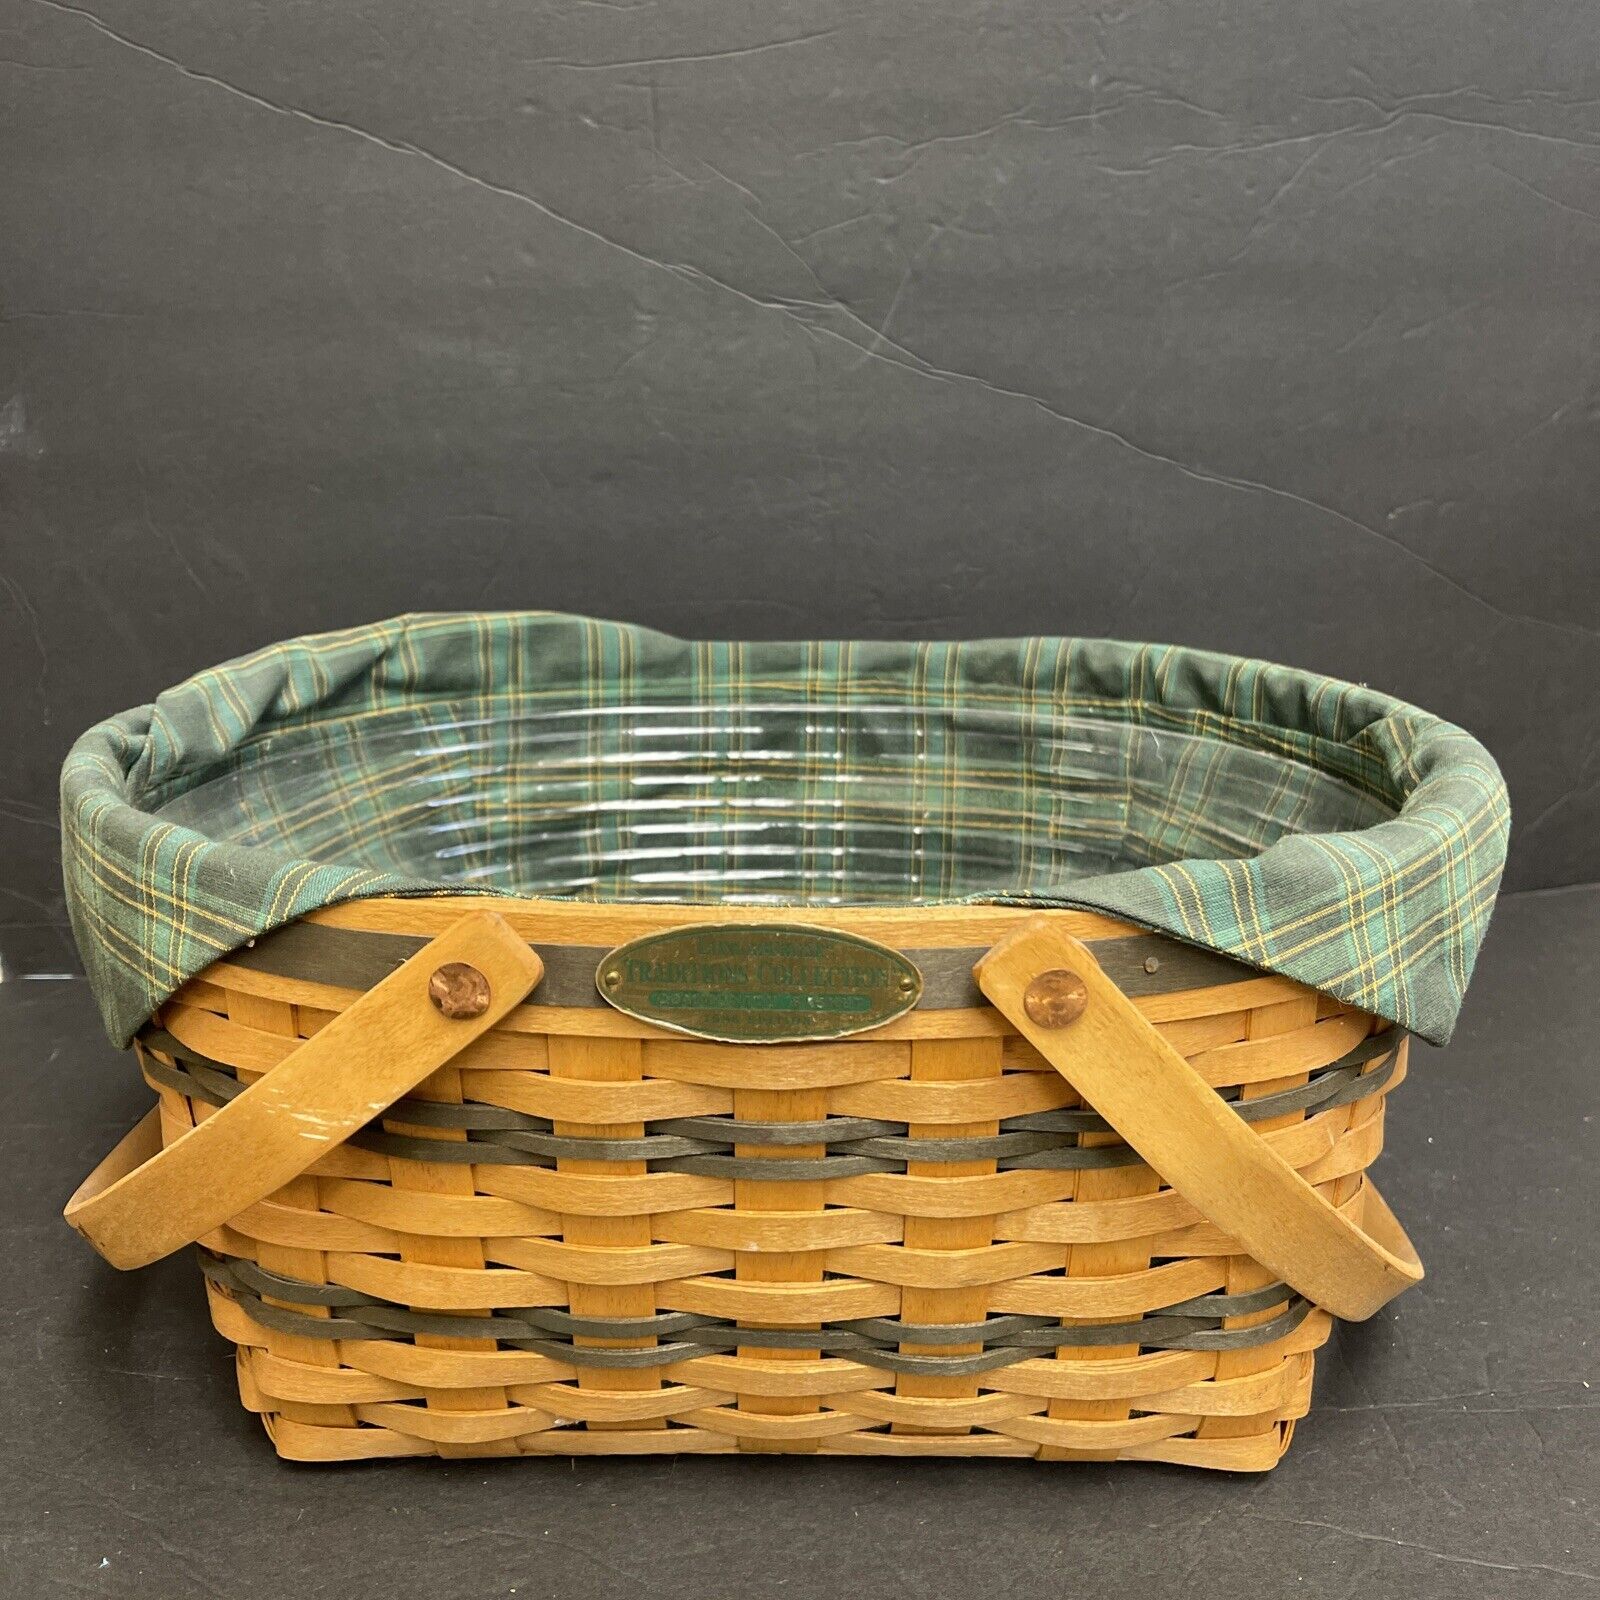 1996 LONGABERGER COMMUNITY BASKET Traditions Collection